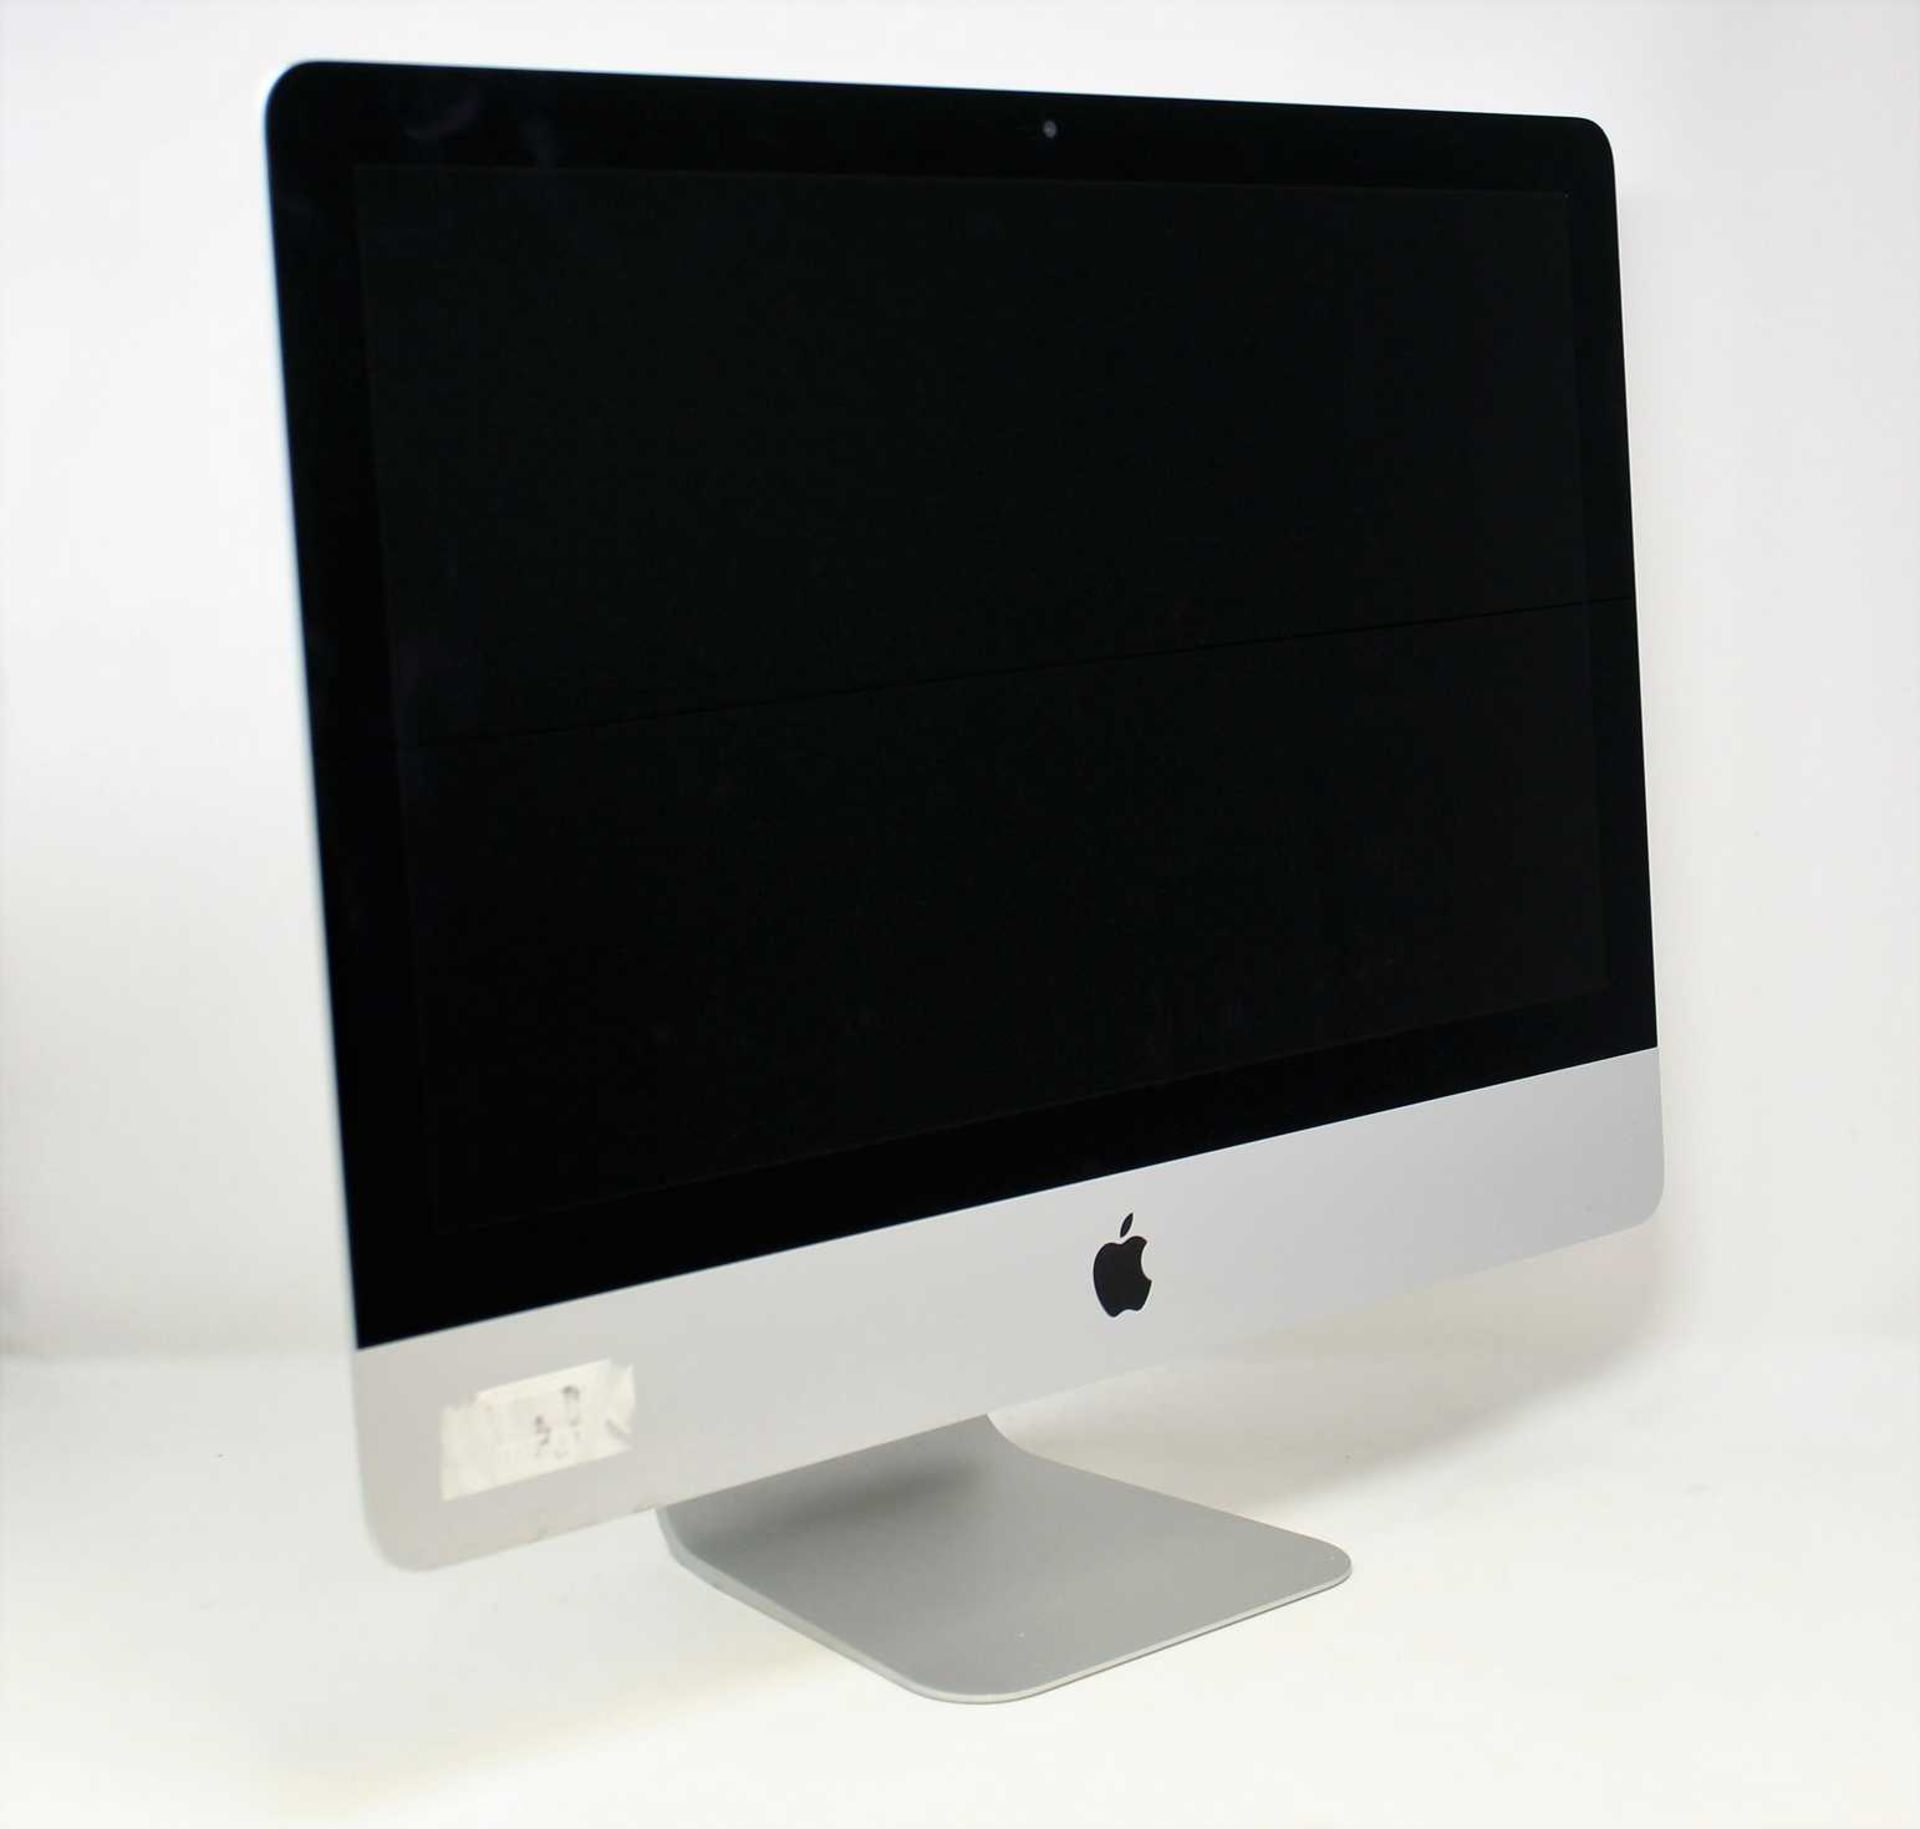 COLLECTION ONLY: A pre-owned Apple iMac (2017, A1418) 21.5" with Intel Dual-Core i5 2.3GHz, 1TB HDD,